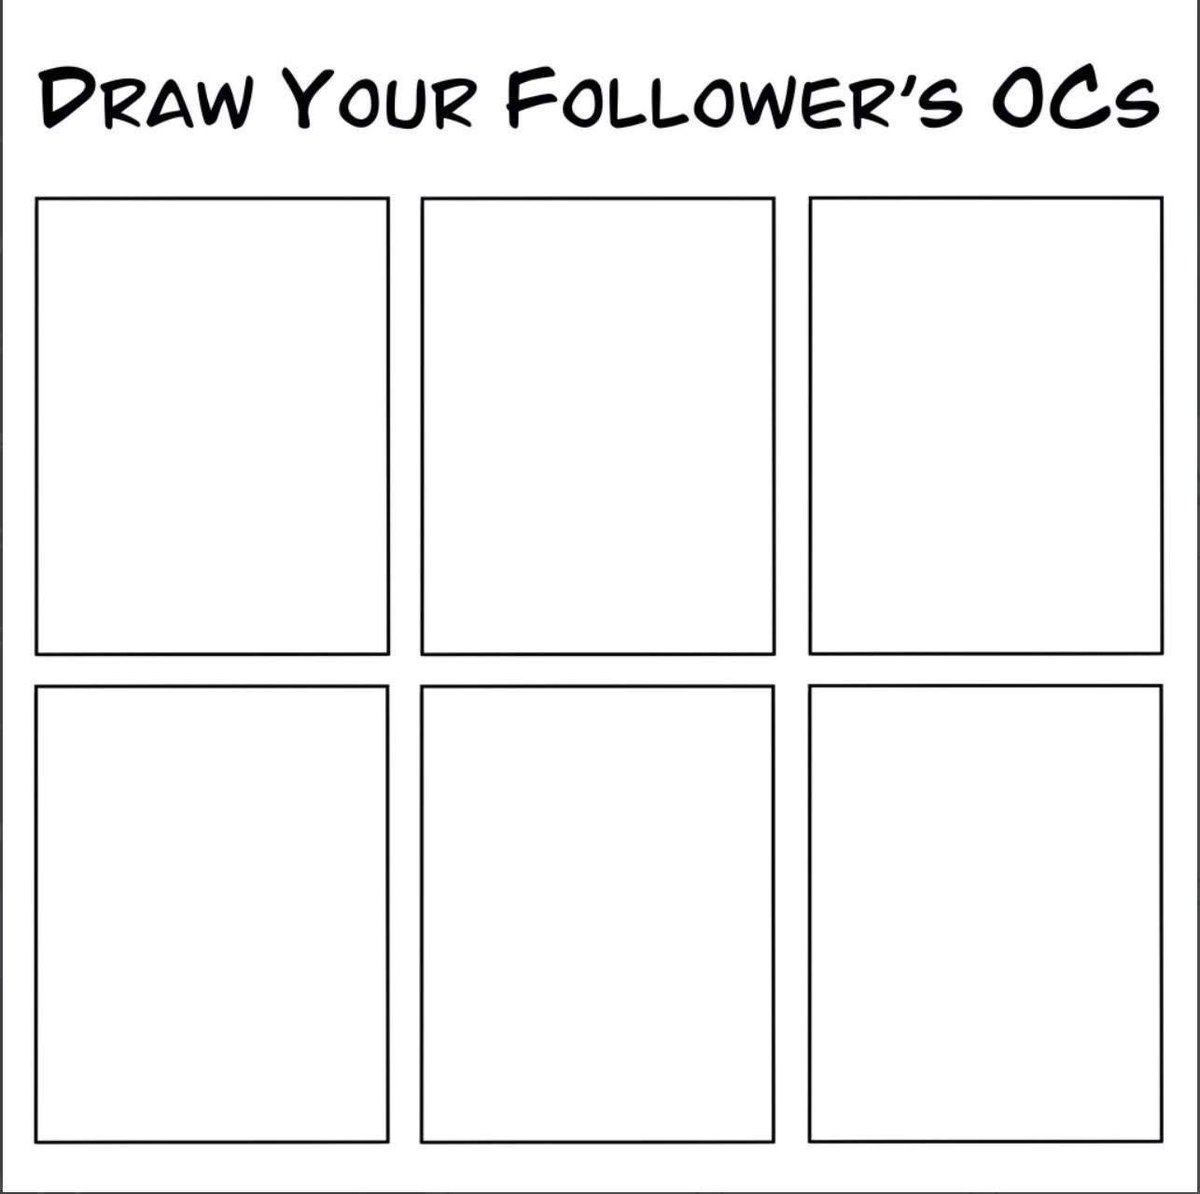 (in 4 hours I'll delete this💔)

Any OC's:333